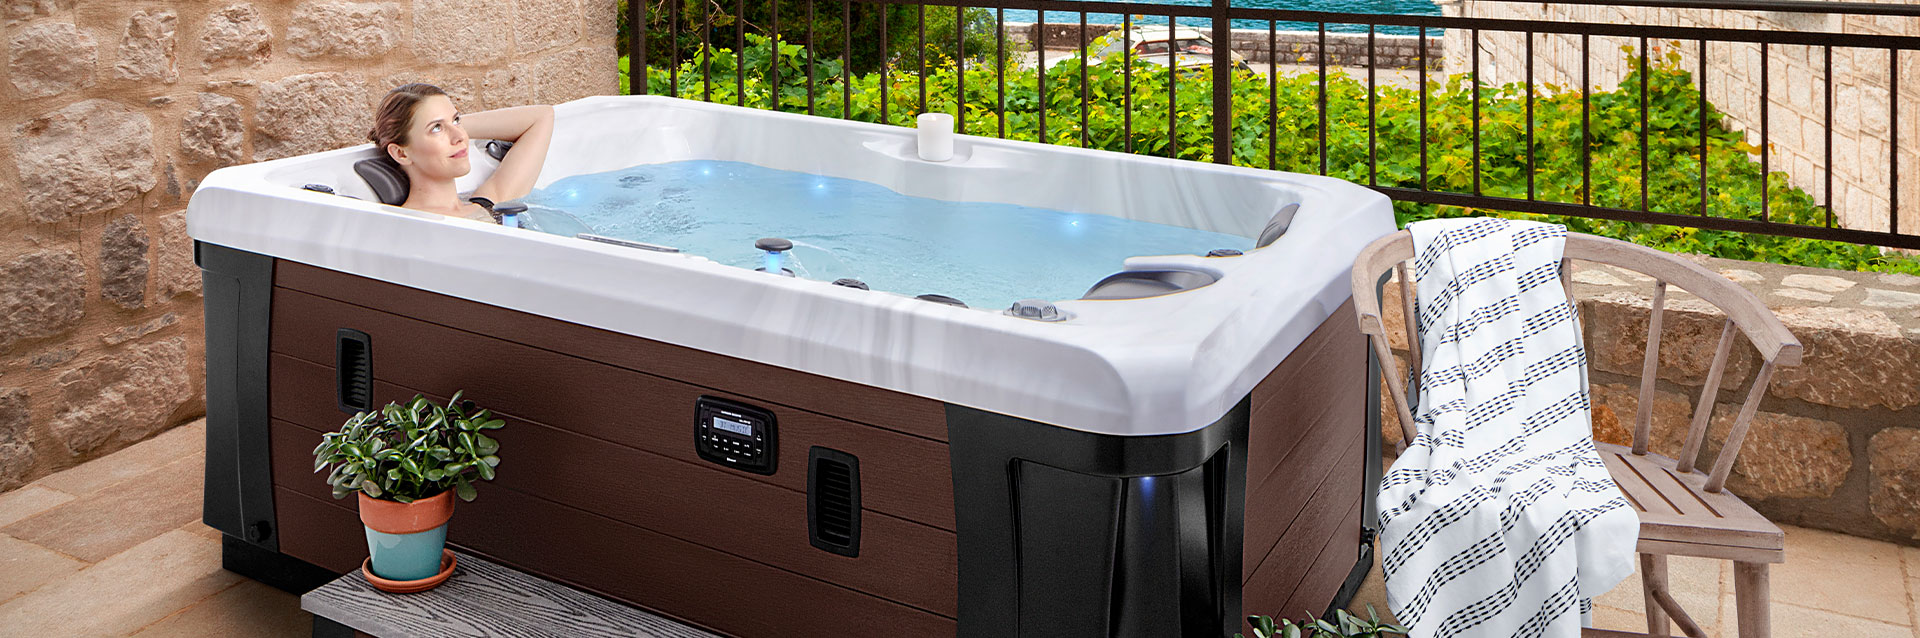 beauty image showing 2 person hot tubs